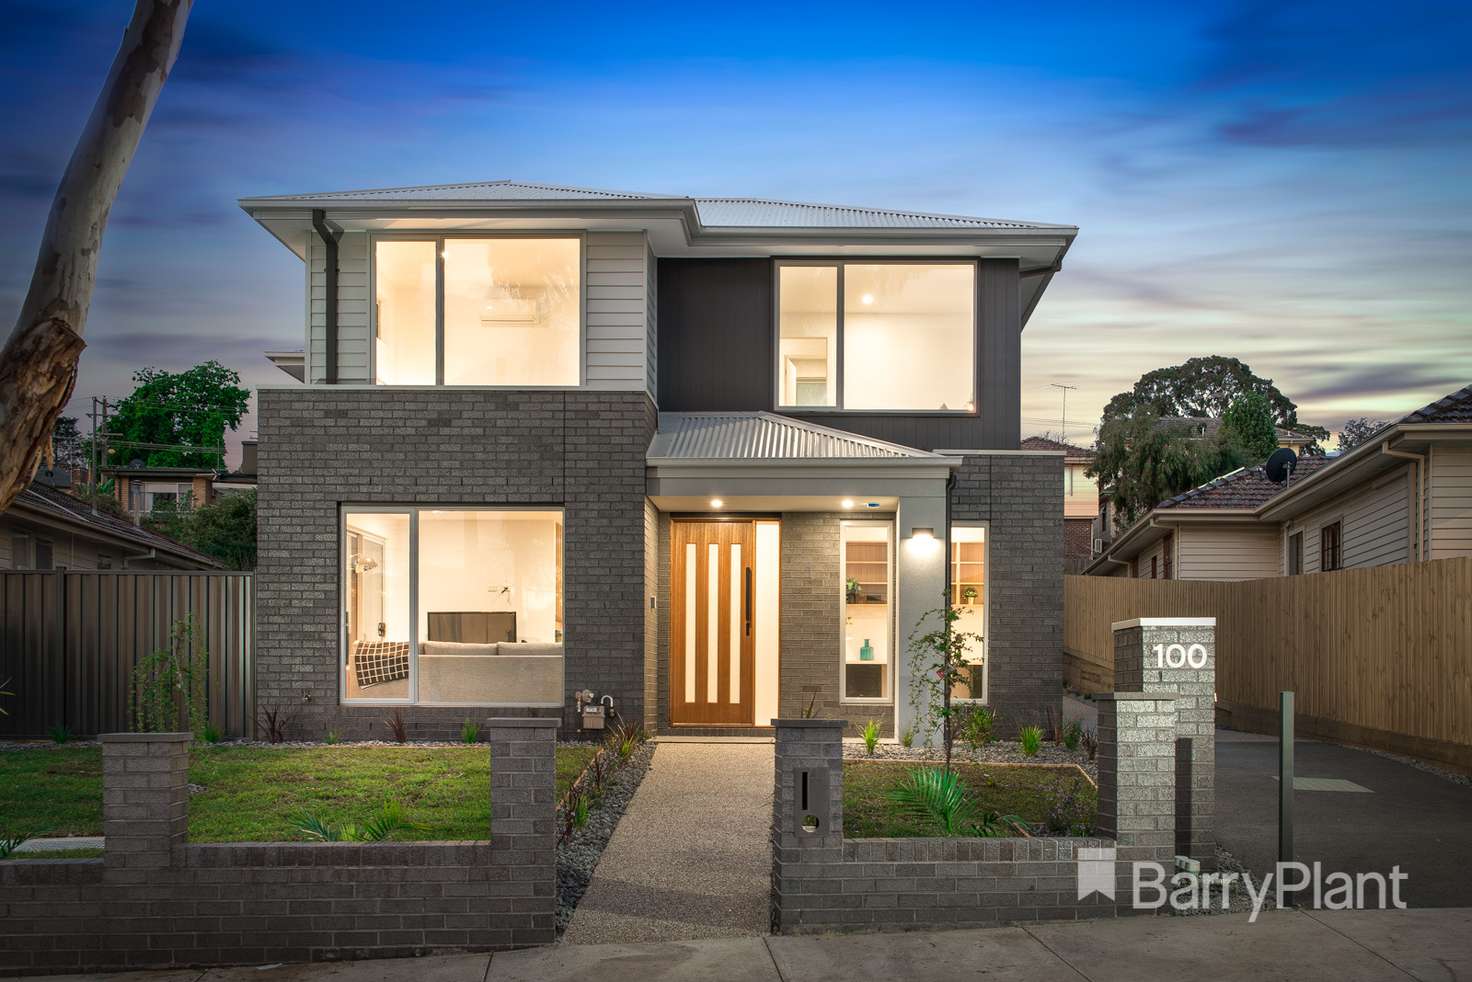 Main view of Homely townhouse listing, 1/100 Winifred Street, Oak Park VIC 3046